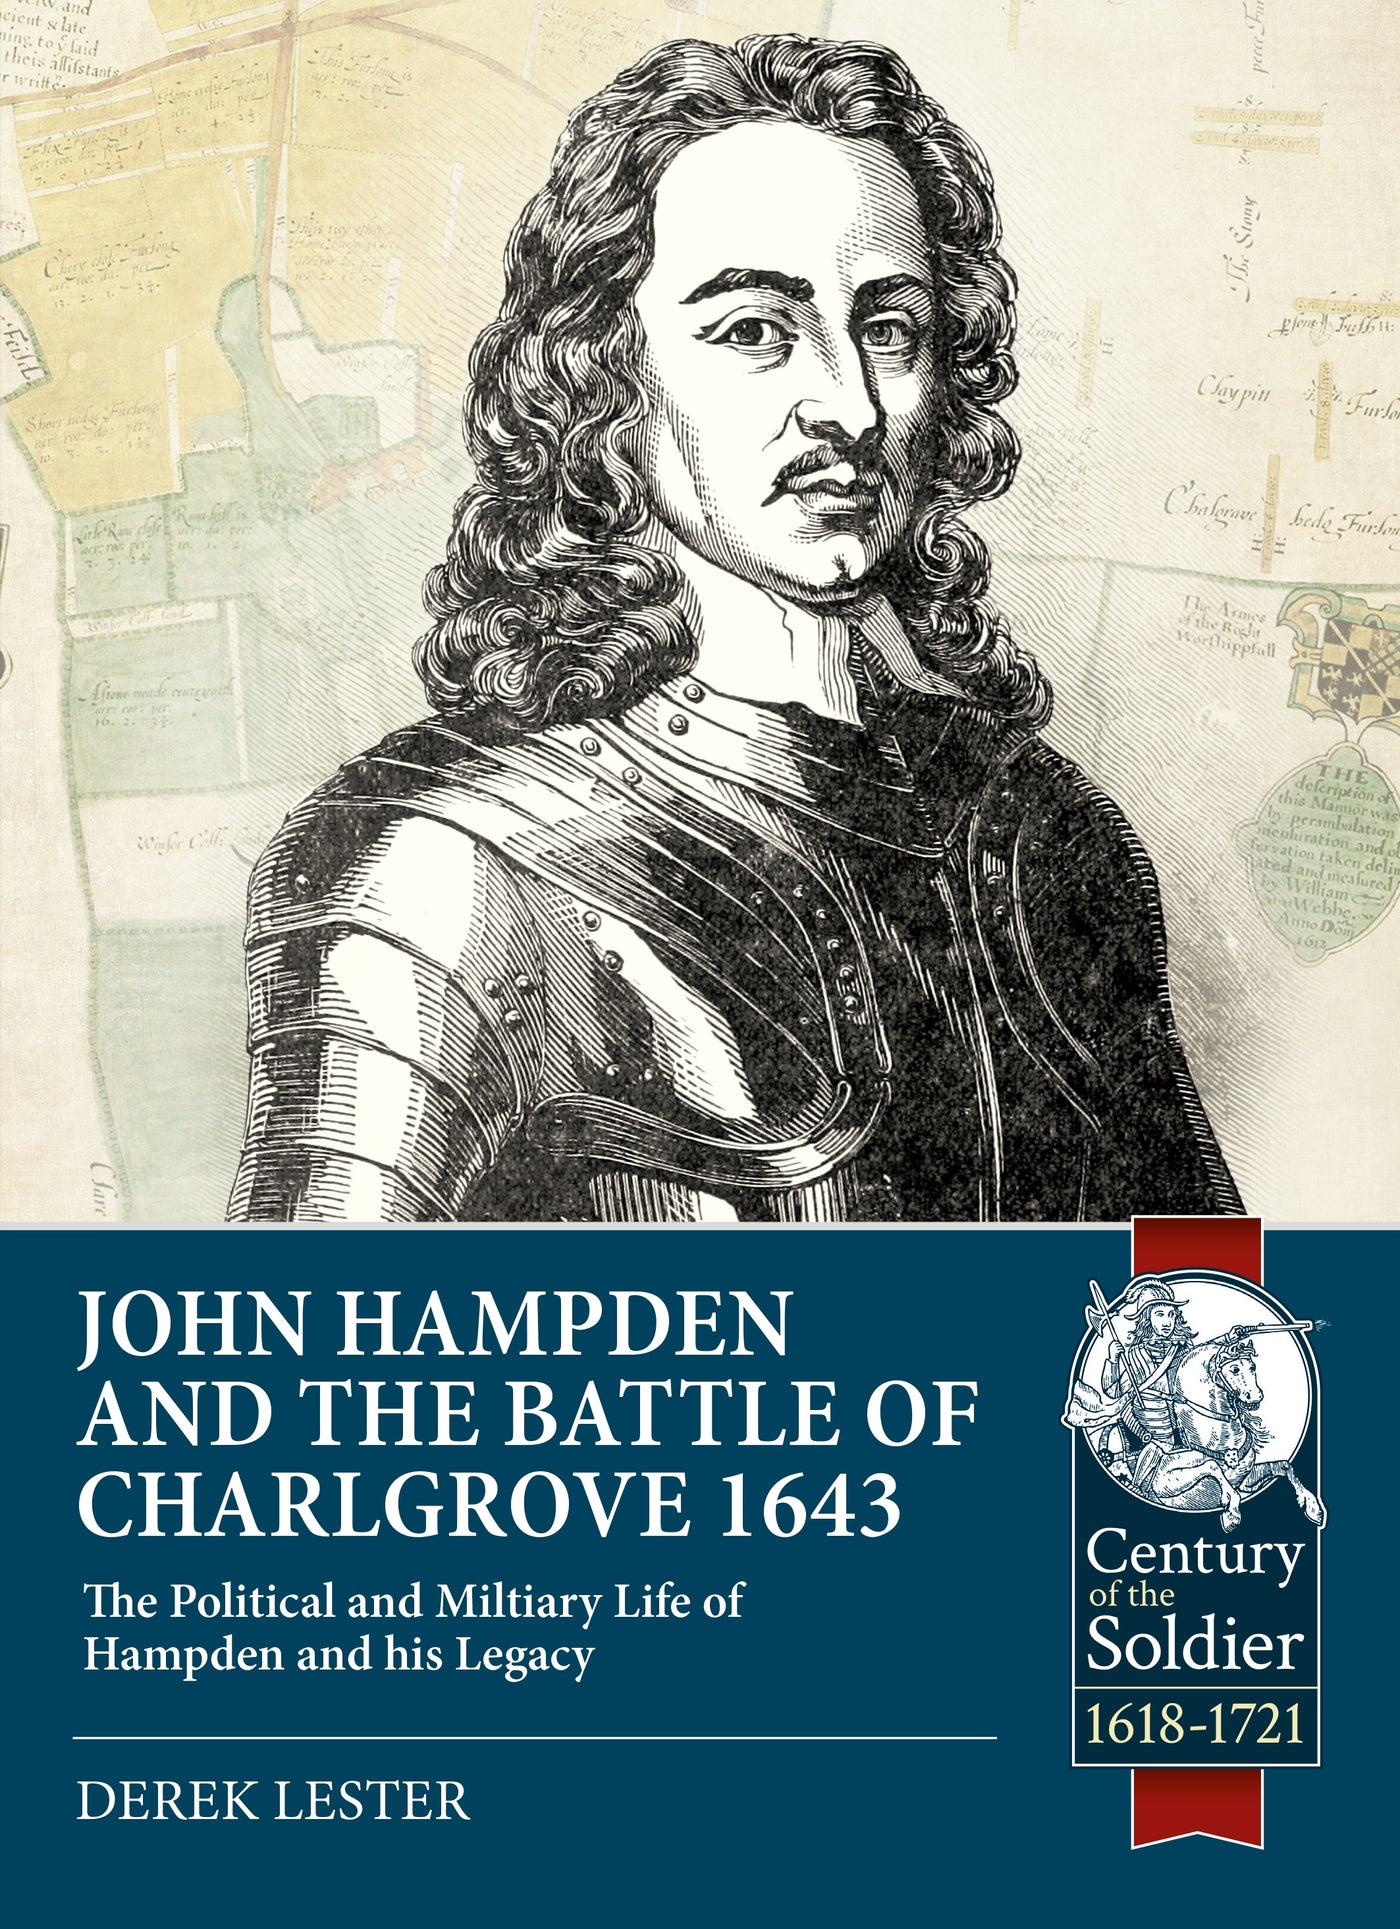 John Hampden and the Battle of Chalgrove